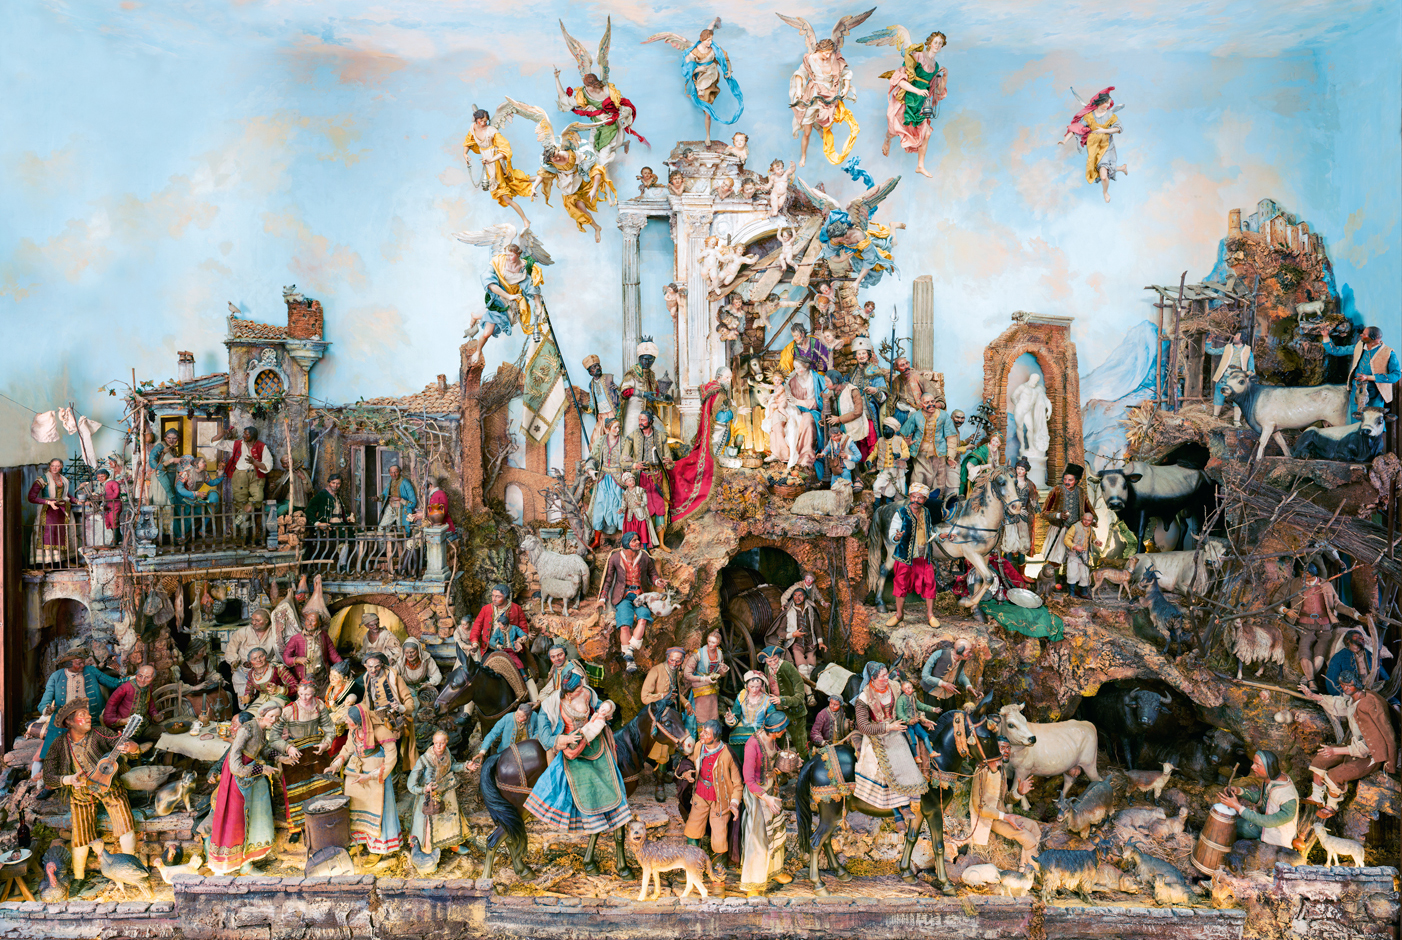 The Chicago Art Institute's Neapolitan crèche ensemble, as currently installed, Chicago, 2016; 